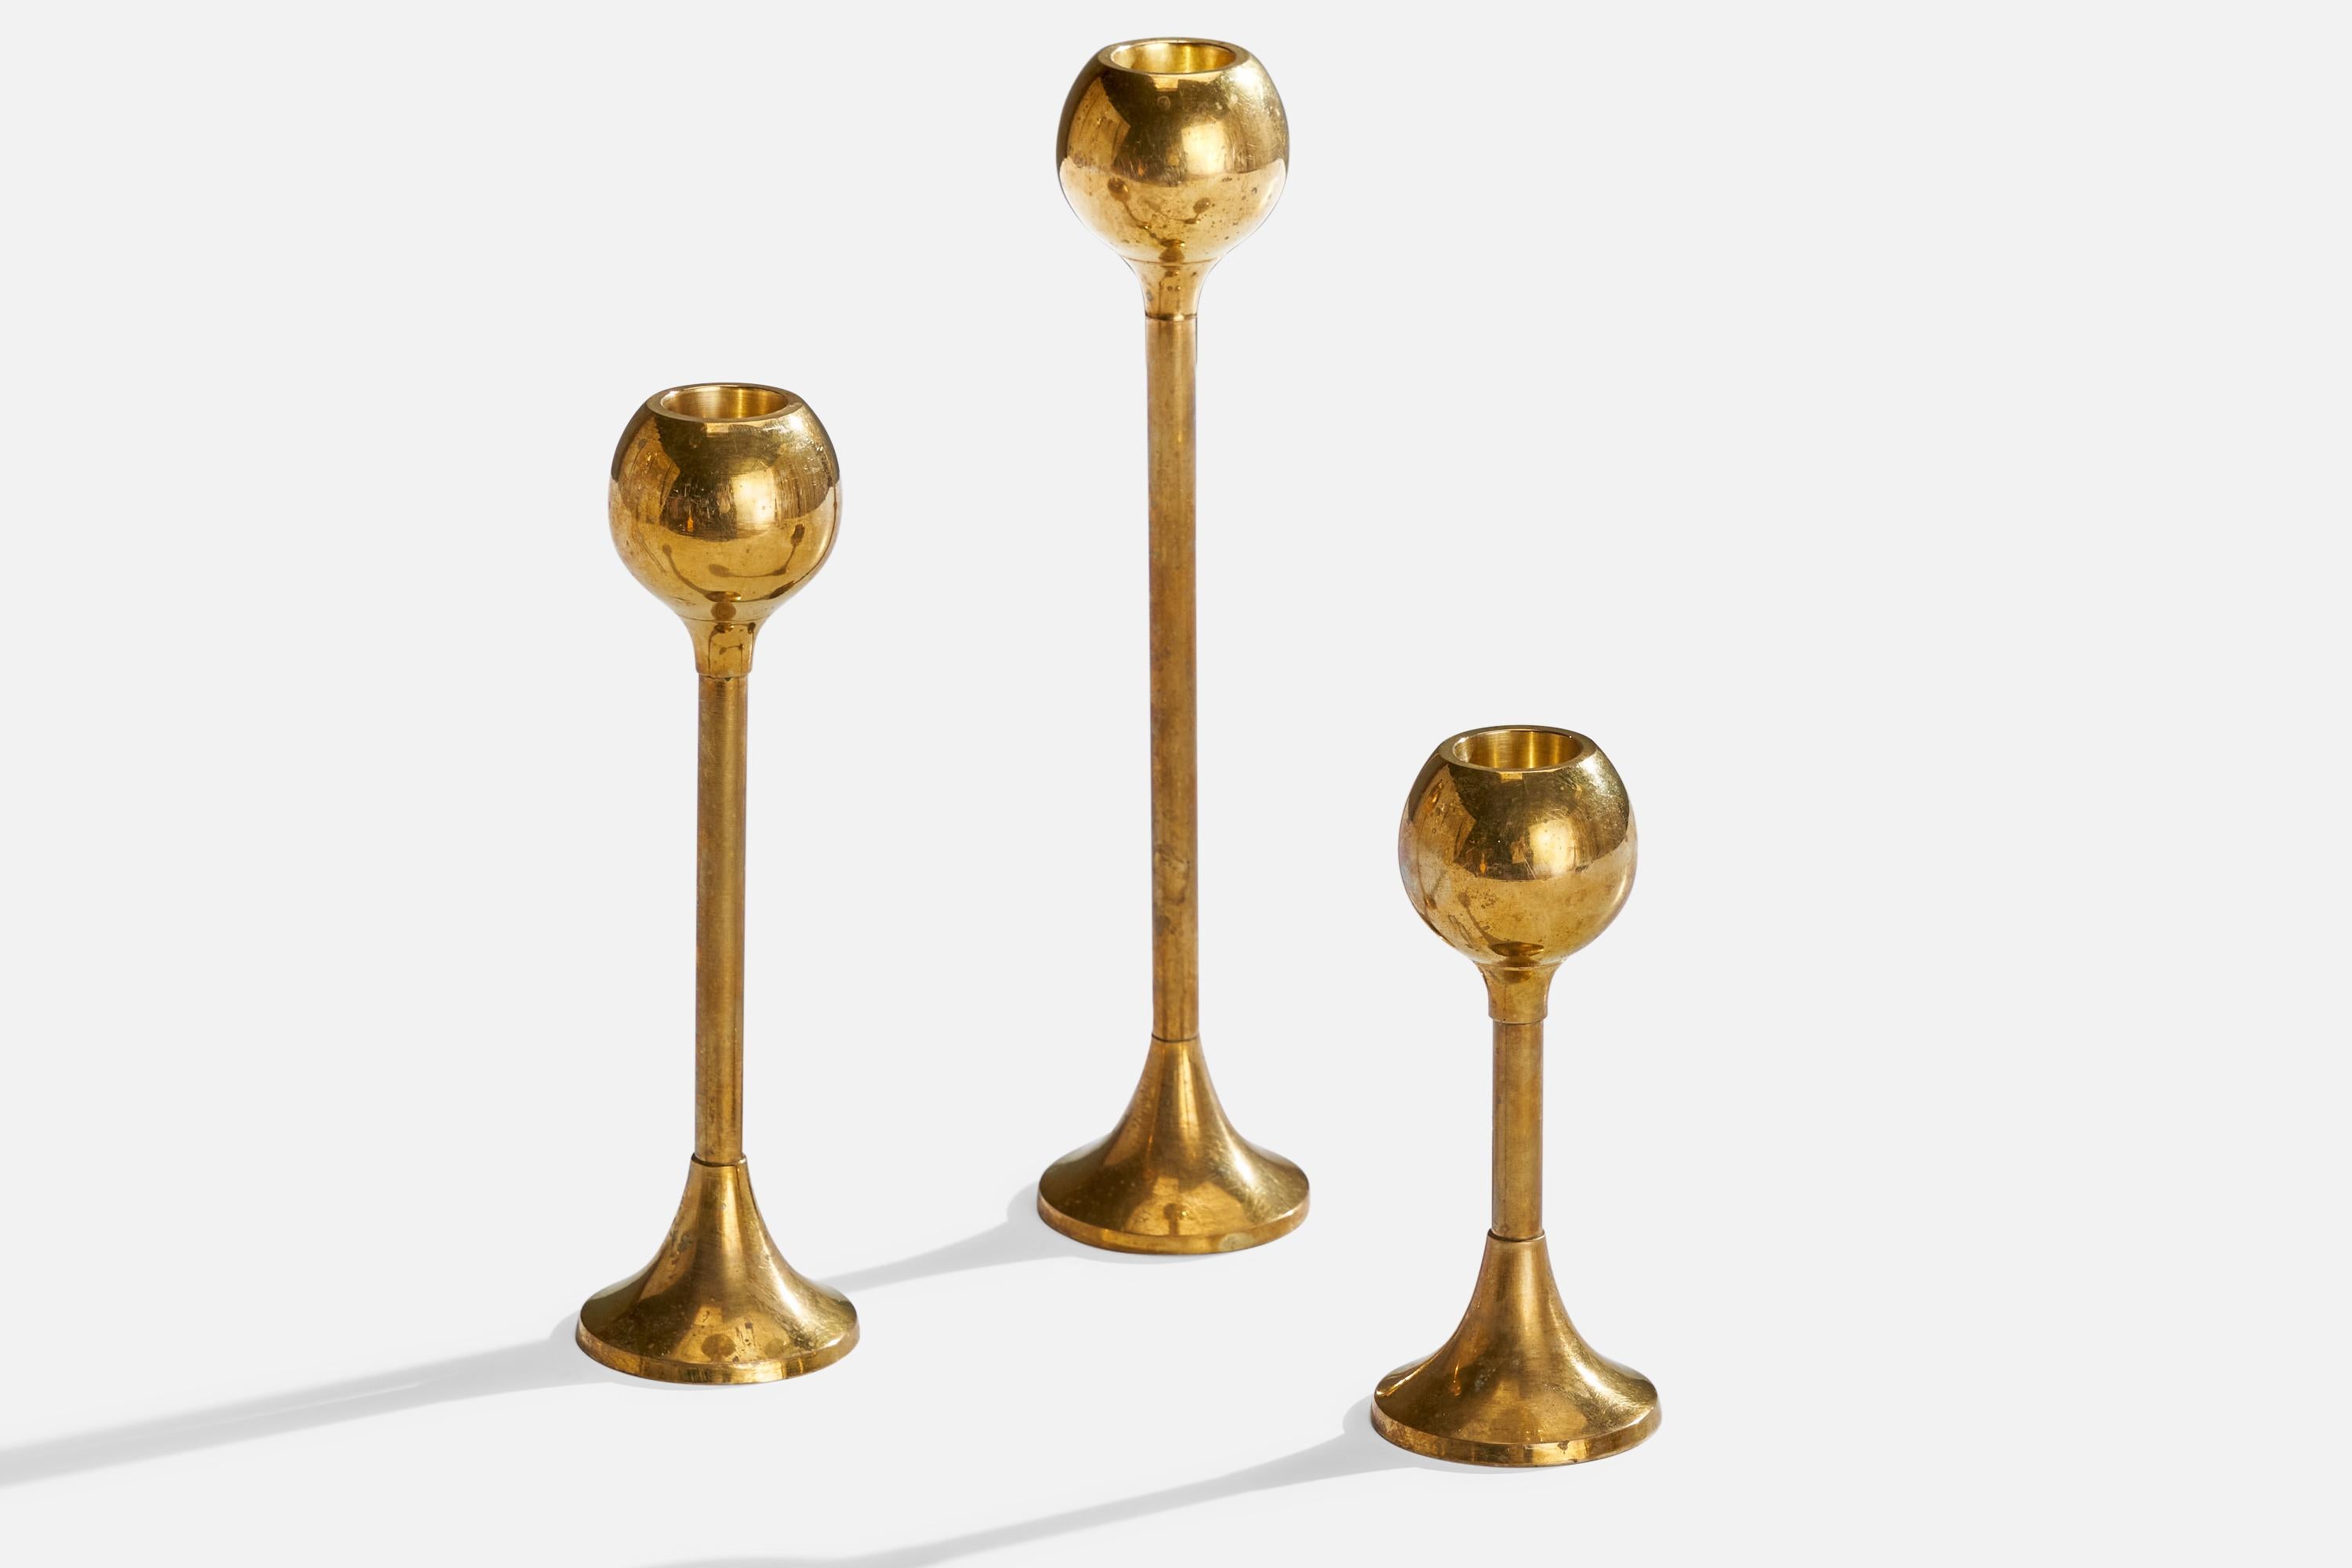 A set of three brass candelsticks designed and produced in Sweden, c. 1950s.

Holds .89